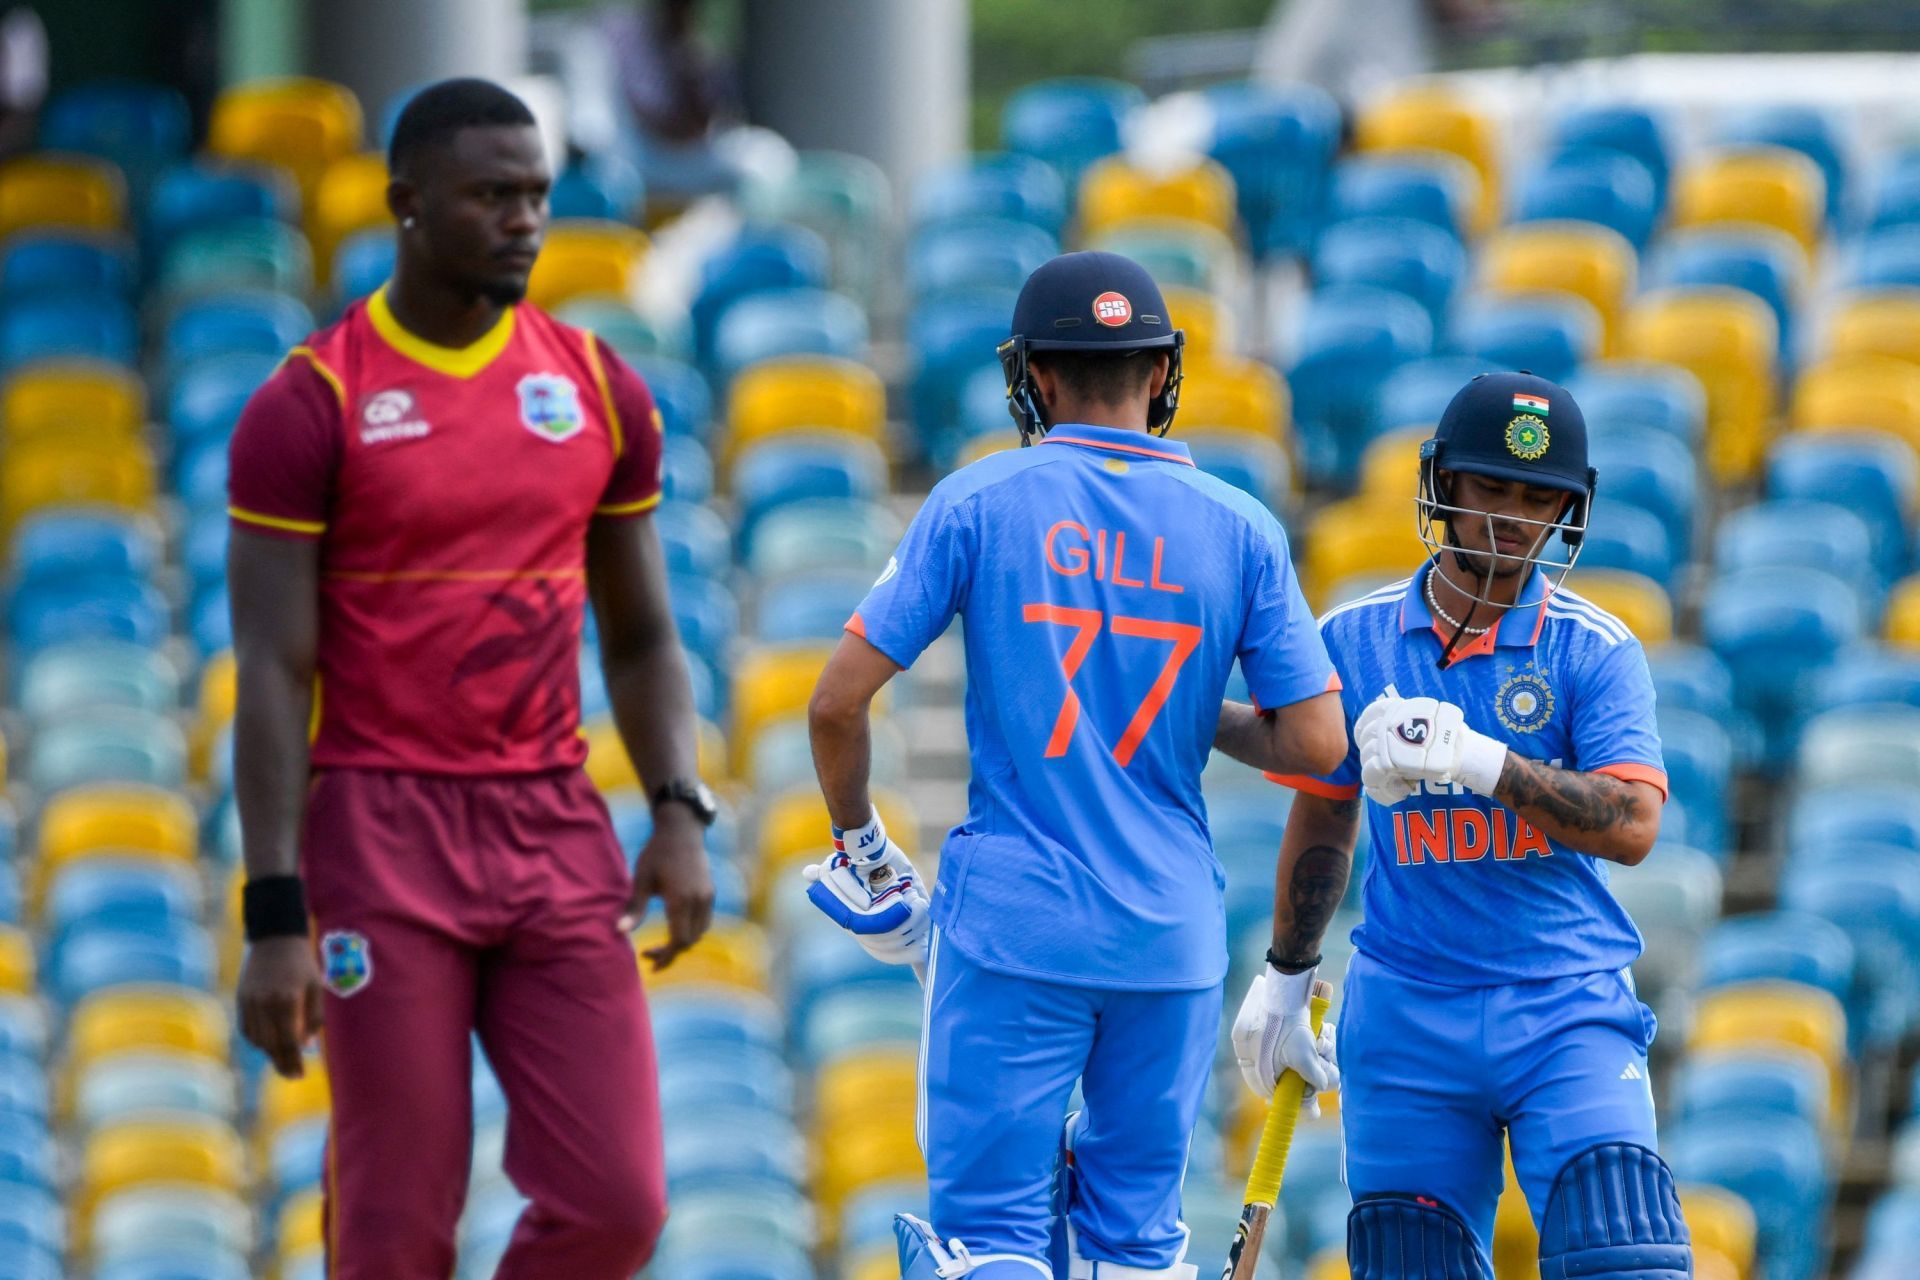 Shubman Gill and Ishan Kishan put on a decent opening partnership before India crumbled